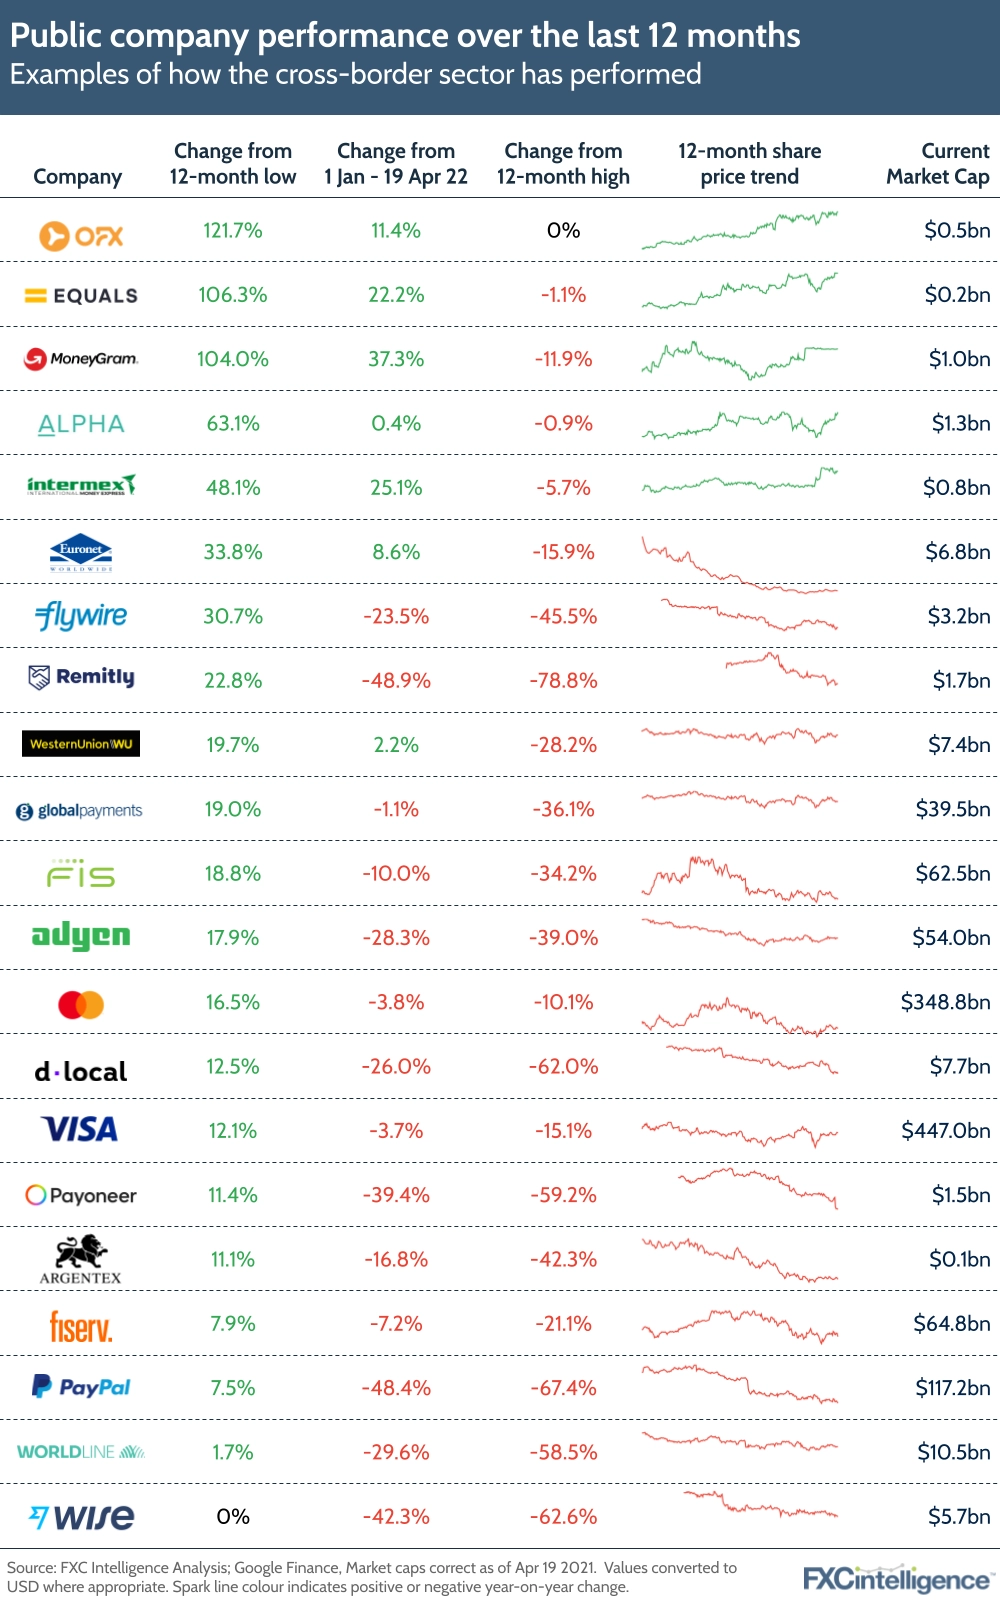 Public company performance over the past 12 months 
Examples of how the global payments sector stocks have performed